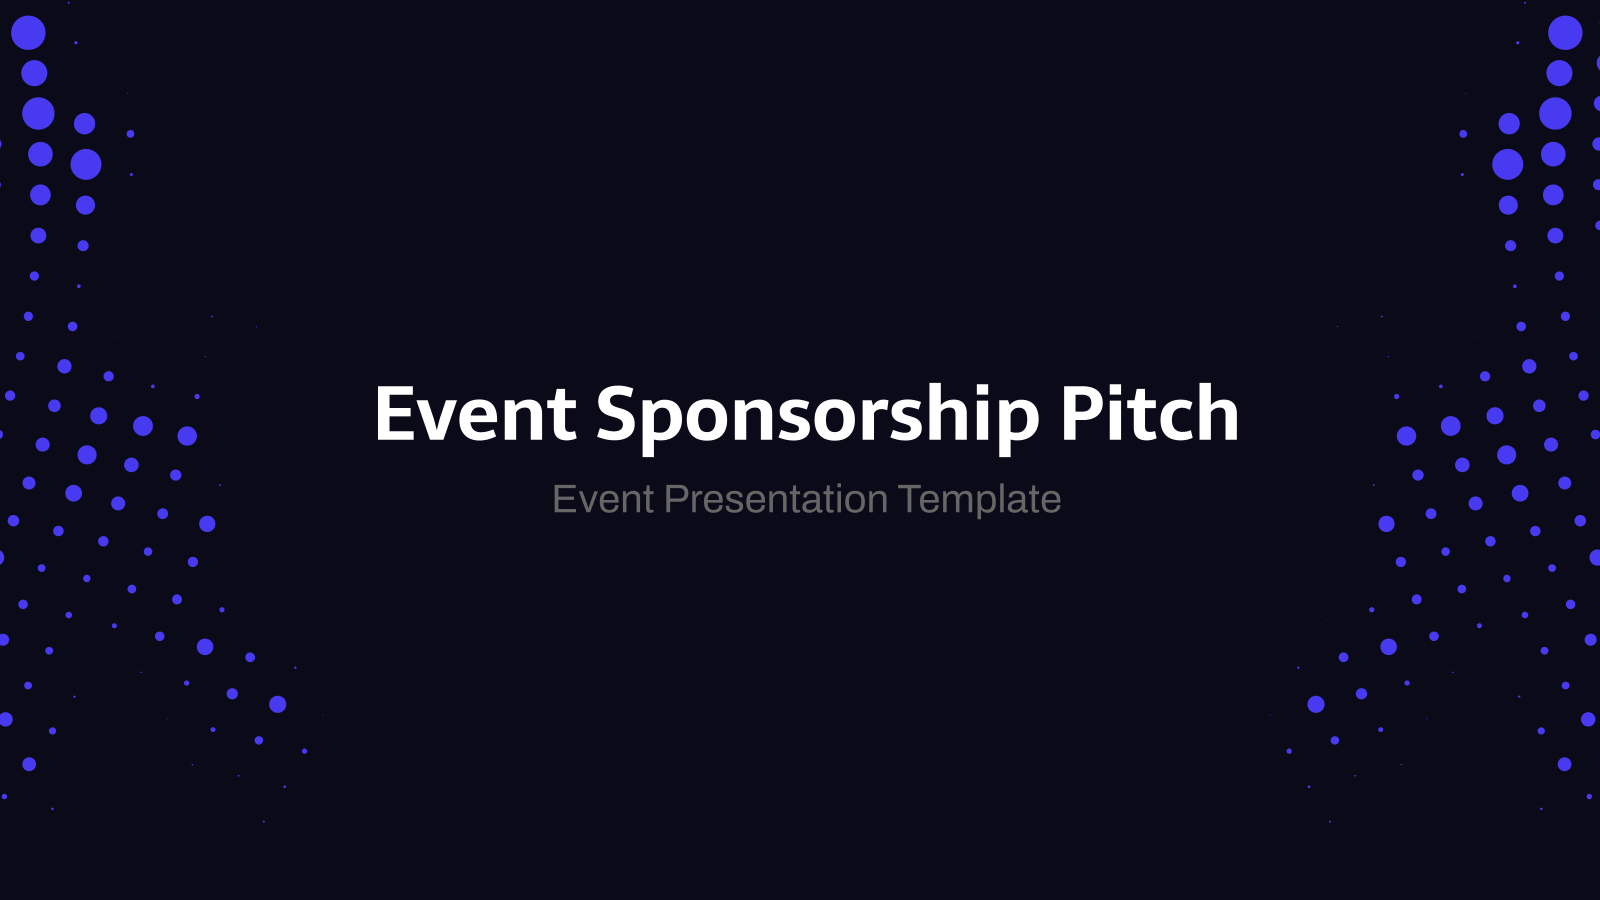 Event Sponsorship Pitch Deck Template